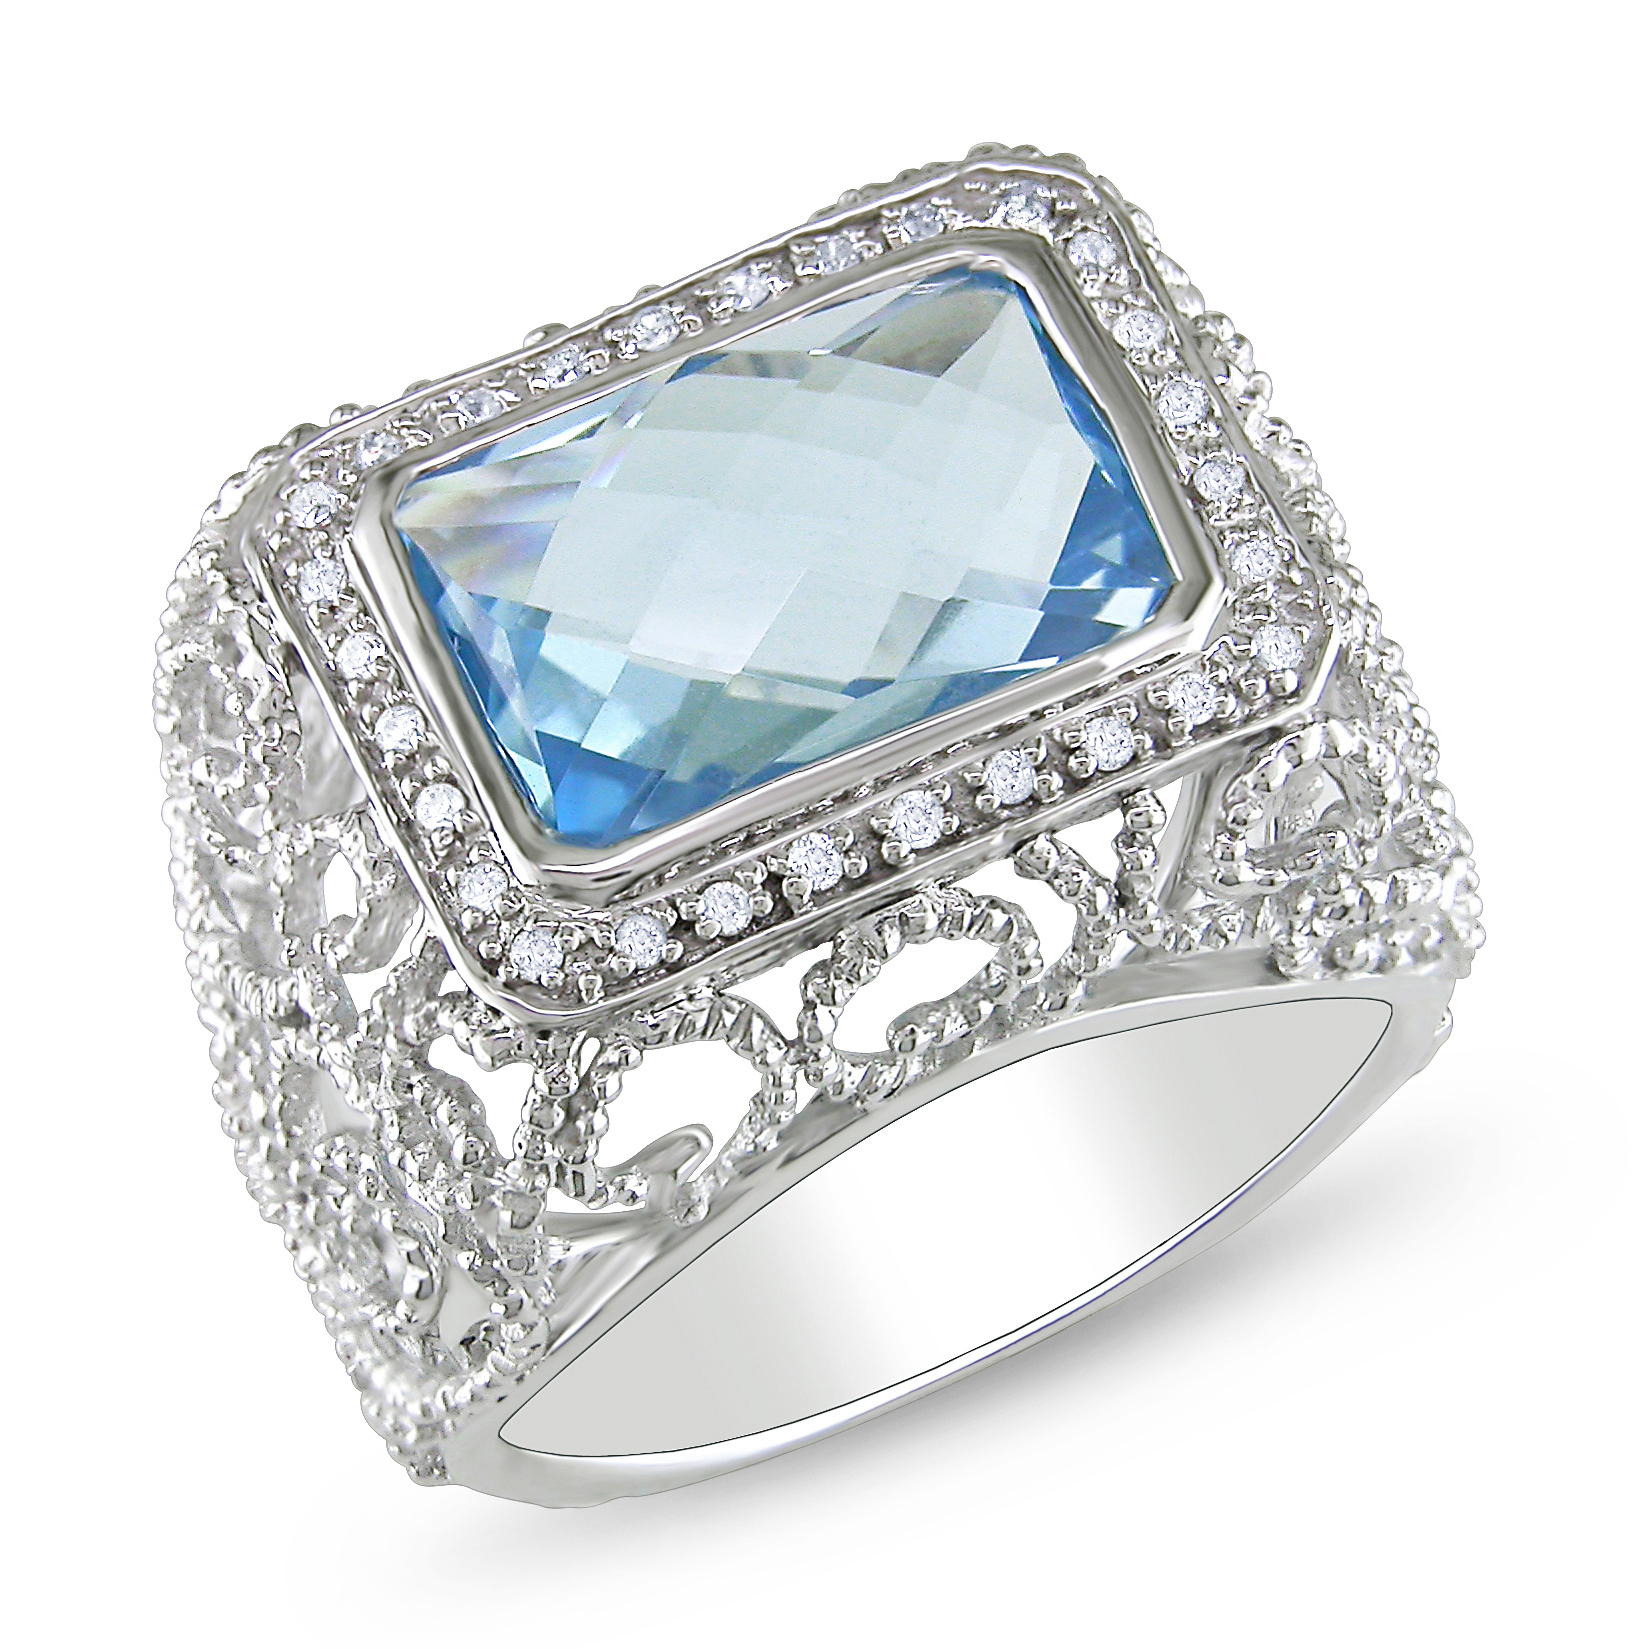 Amour 1/10 Carat T.W. Diamond and 6 Carat T.G.W. Blue Topaz Fashion Ring in Sterling Silver GH I3